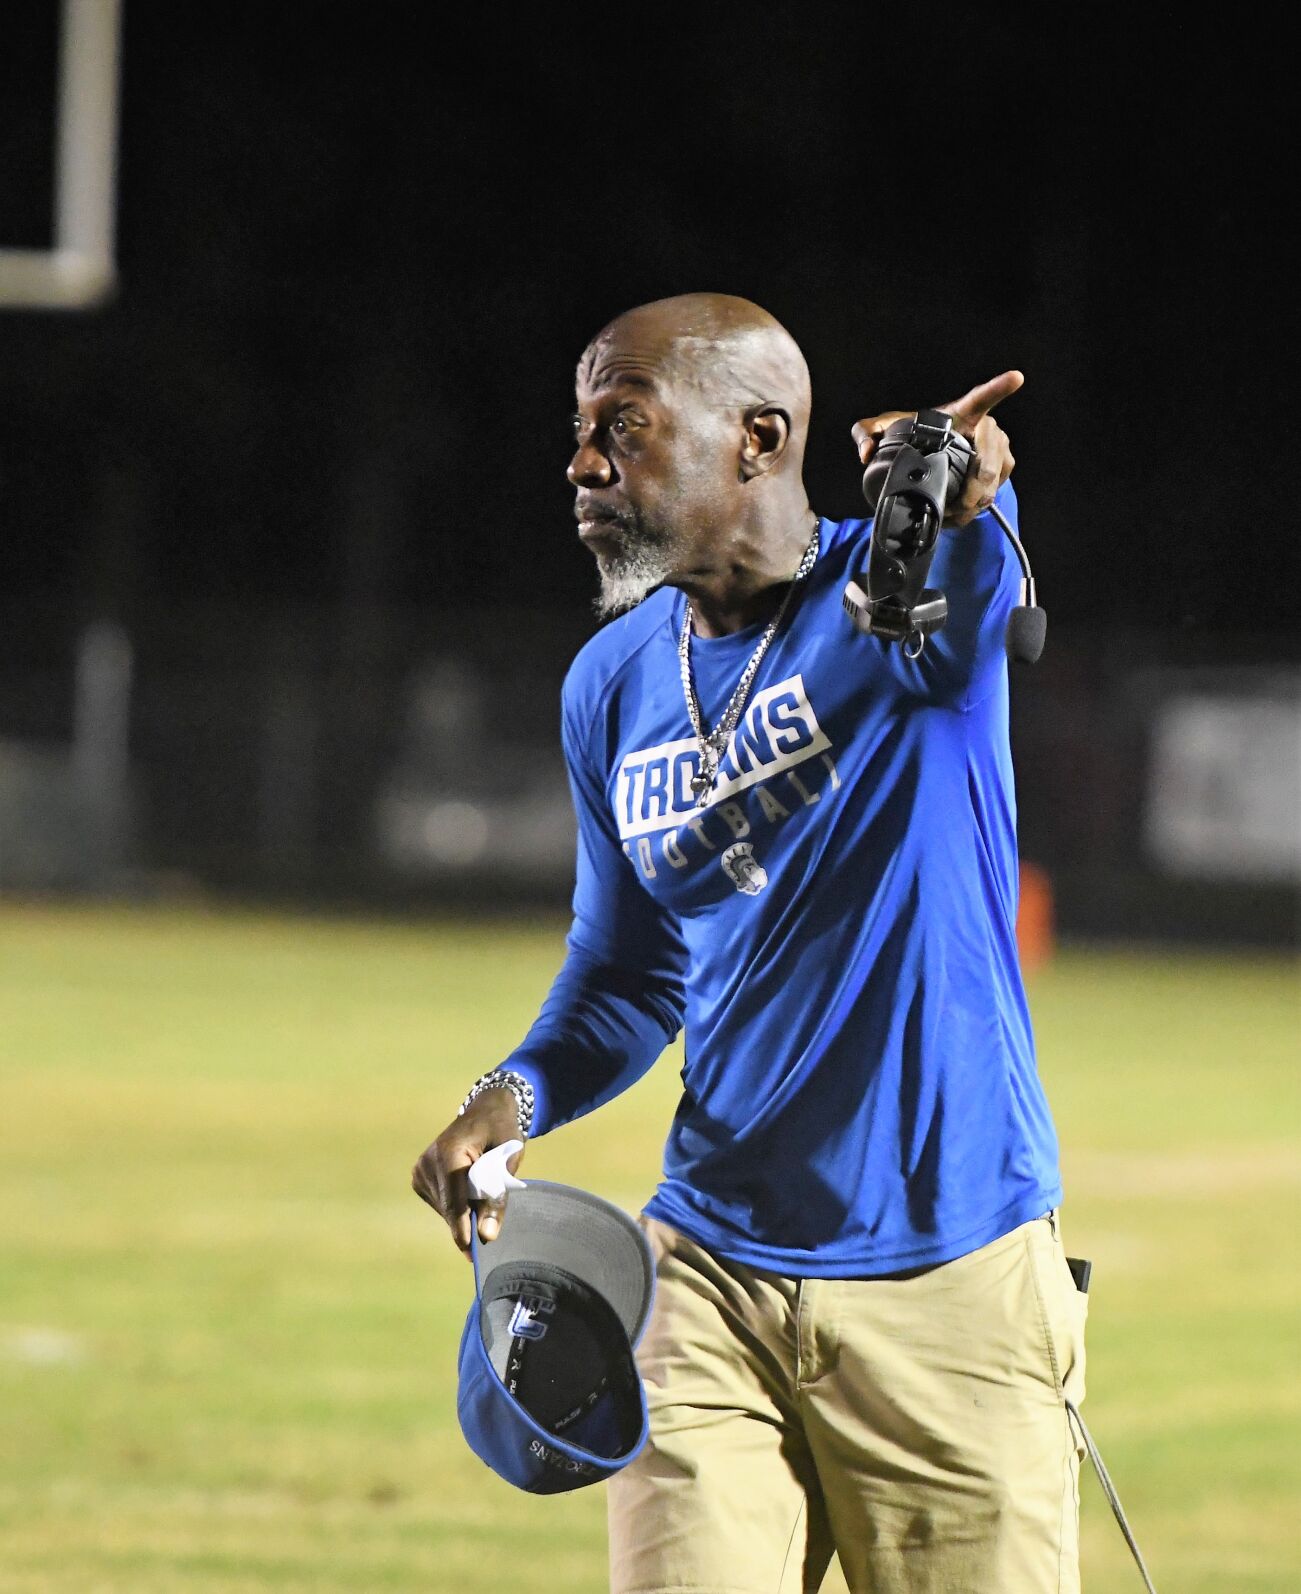 Shaun Wright Named Lower State Coach of the Year, Cross High School’s 11-Game Win Streak, and Player Awards